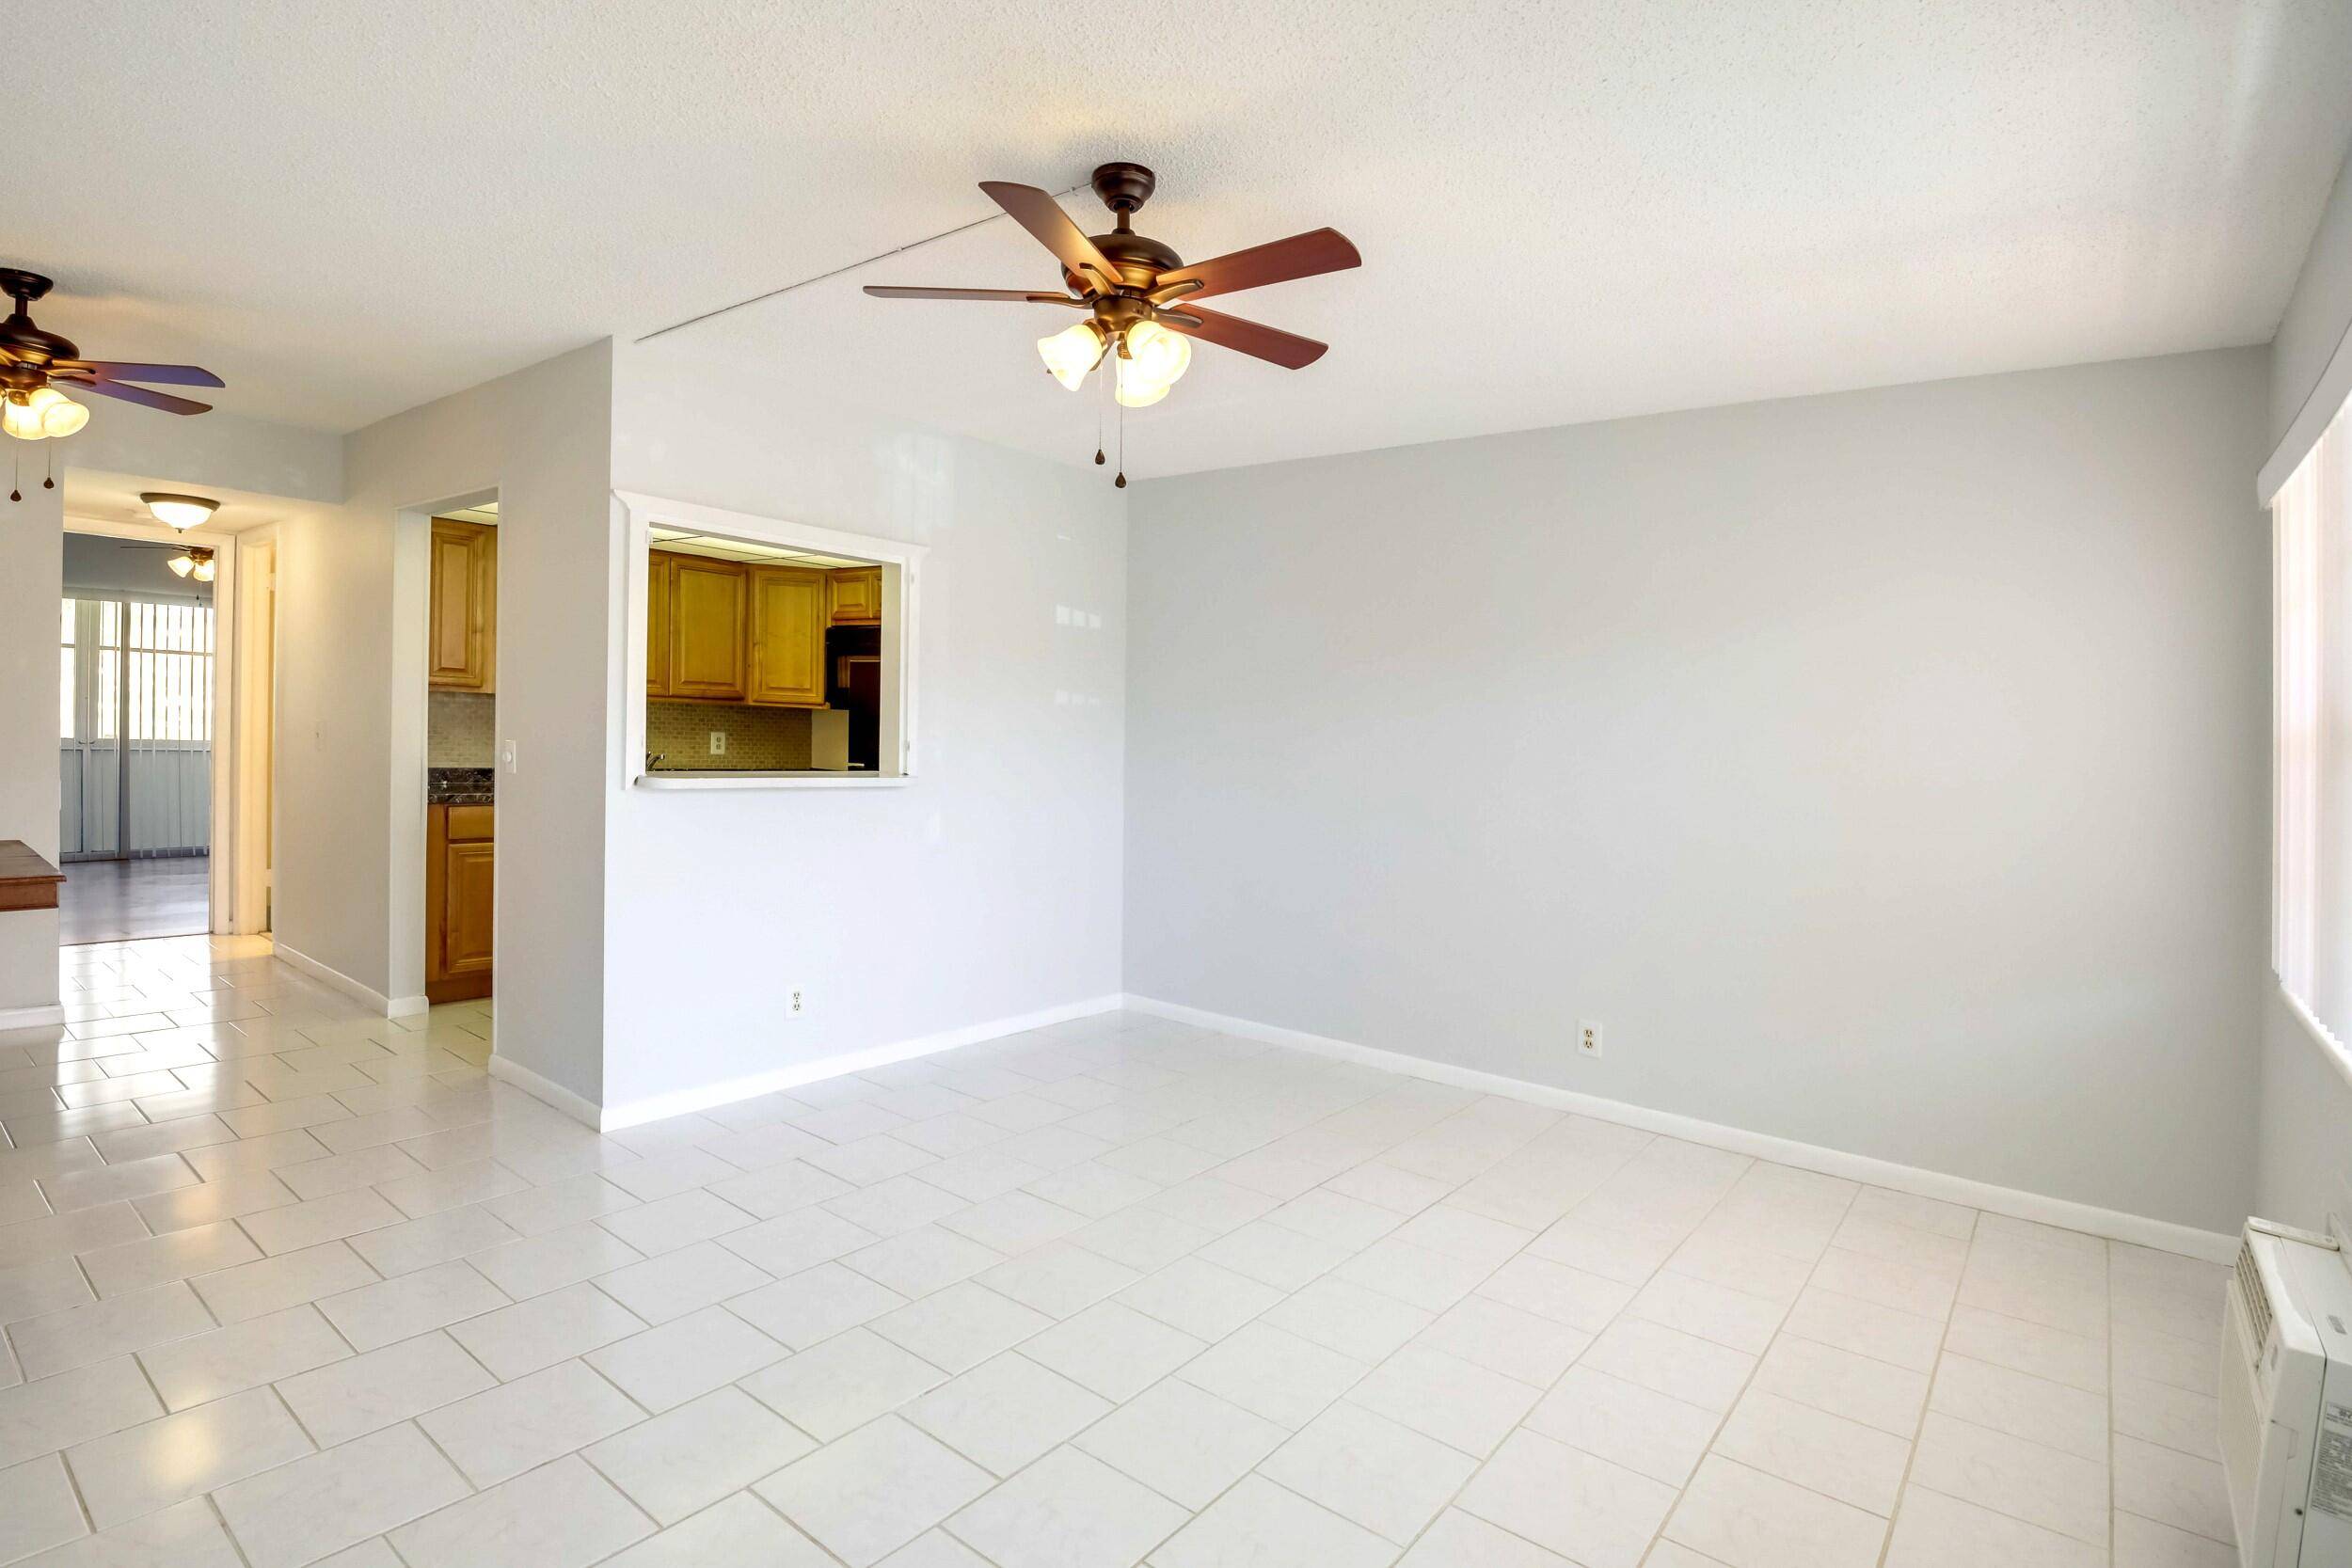 FRESHLY PAINTED FIRST FLOOR UNIT IN A 5FI5 PLUS COMMUNITY CONVENIENTLY LOCATED NEAR THE OKEECHOBEE GATE NICELY APPOINTED 1ST FLOOR 1BR 1BA CONDO IN THE DESIRABLE COMMUNITY OF CENTURY VILLAGE ...